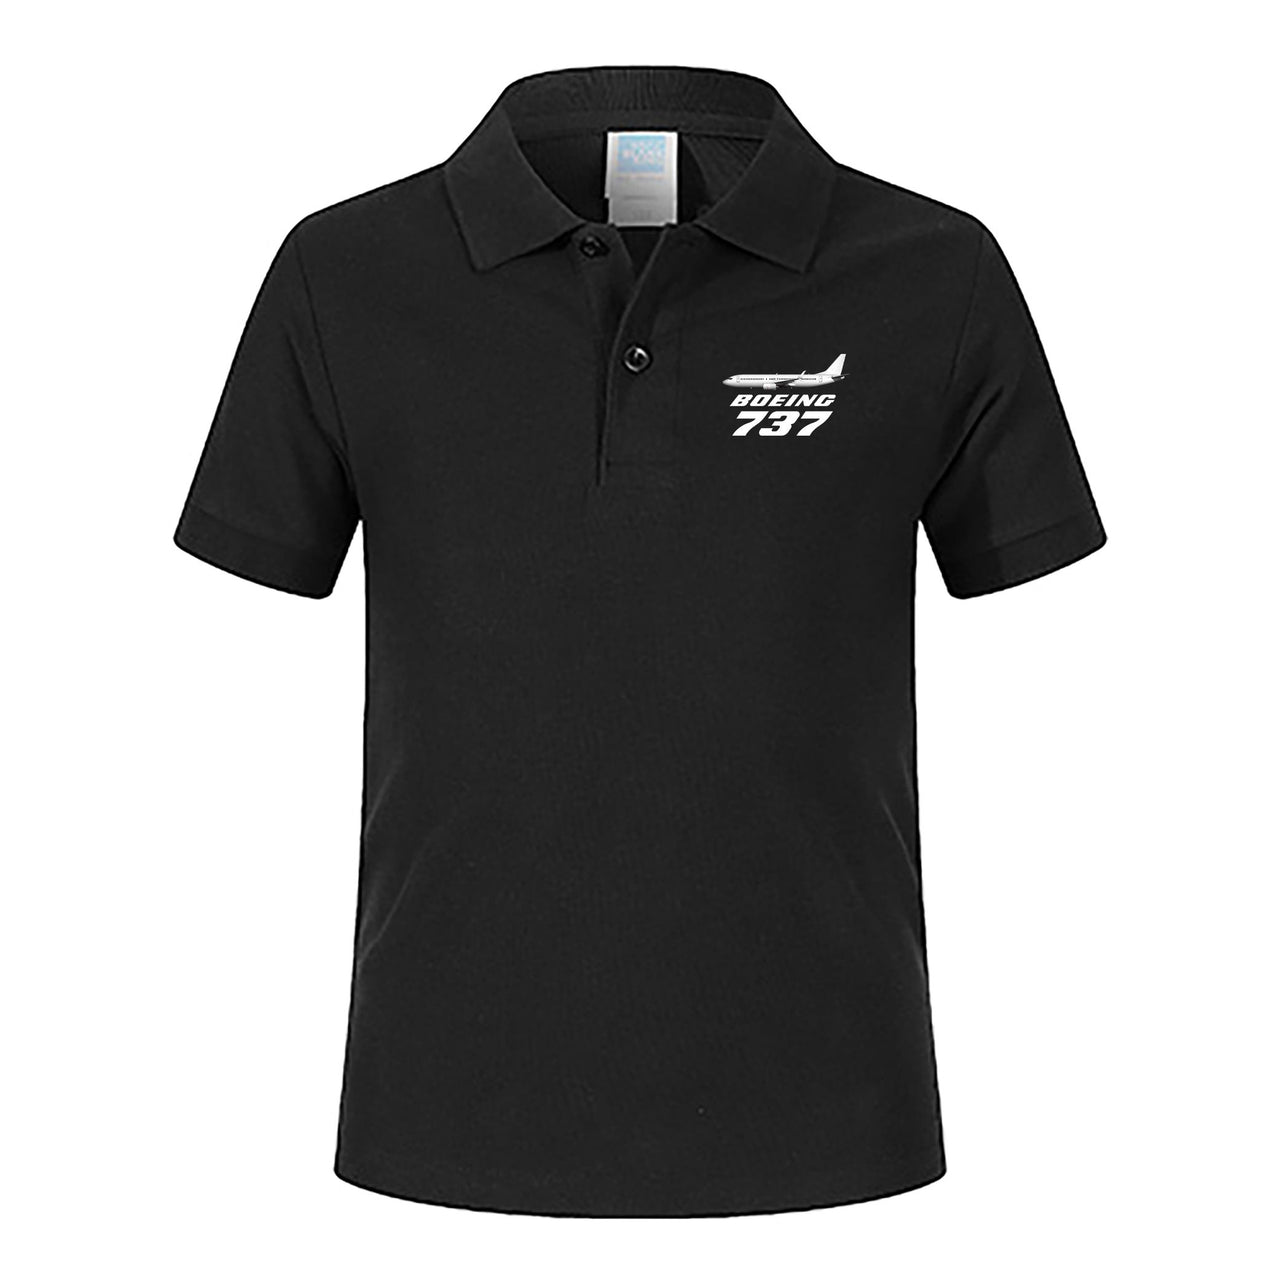 The Boeing 737 Designed Children Polo T-Shirts